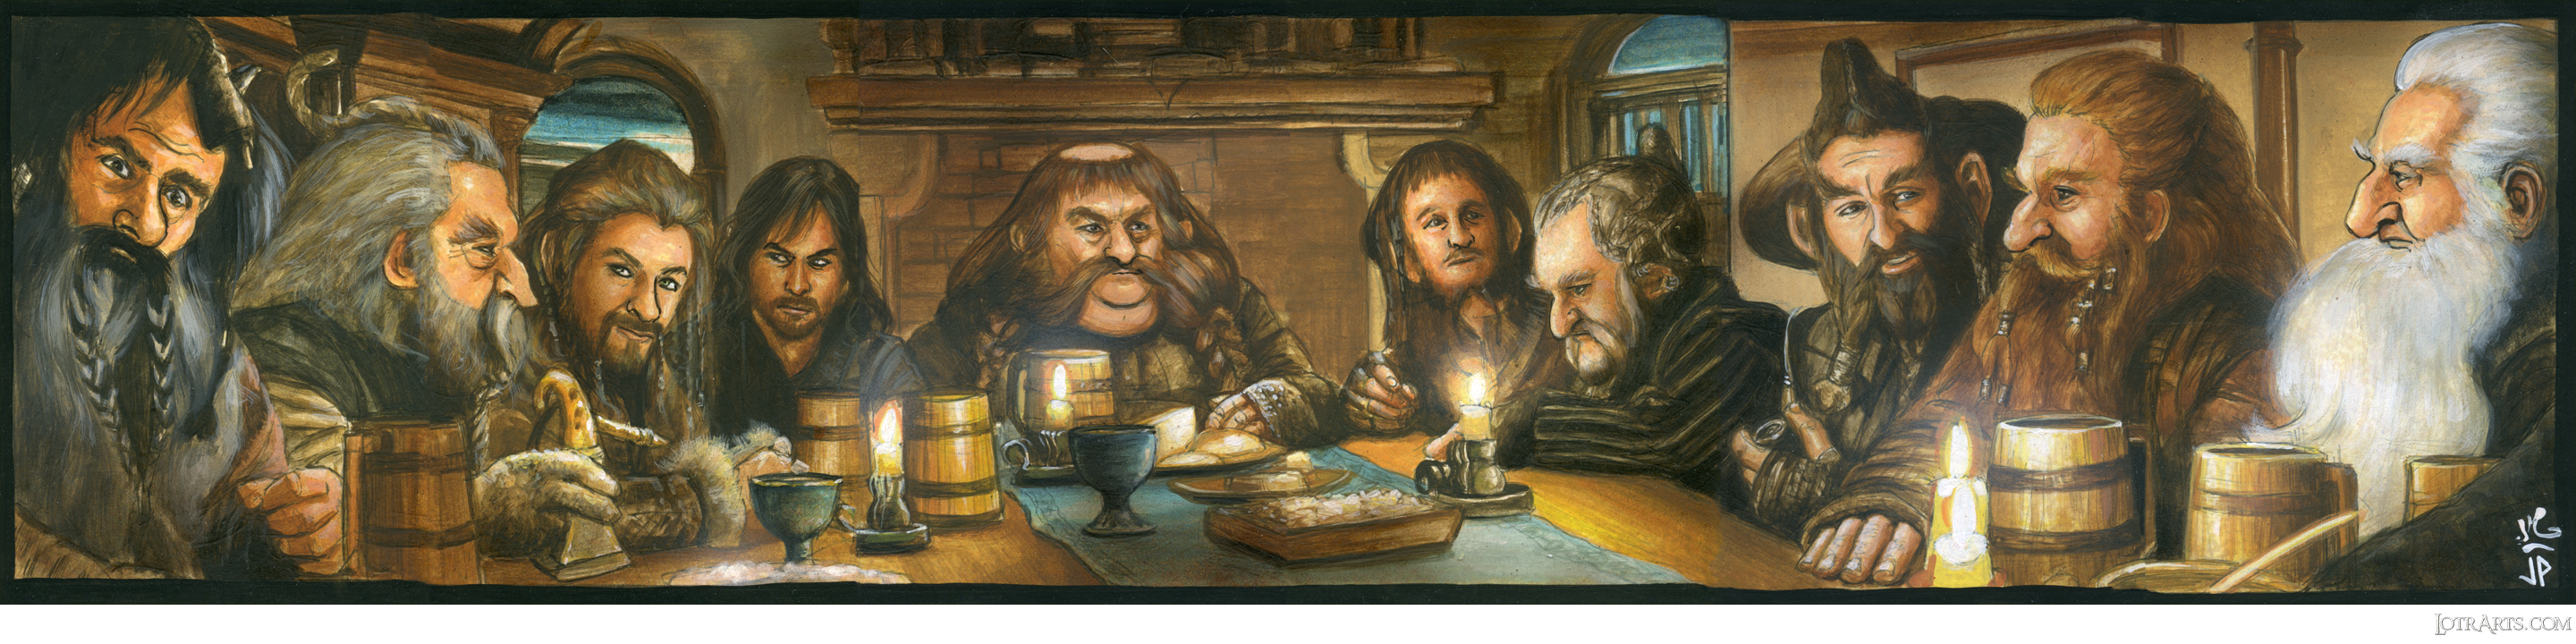 The dwarves meet at Bag End (Part1) by Potratz and Hai, five-card panel (sequenced with three-card panel)<span class="ngViews">4 views</span>